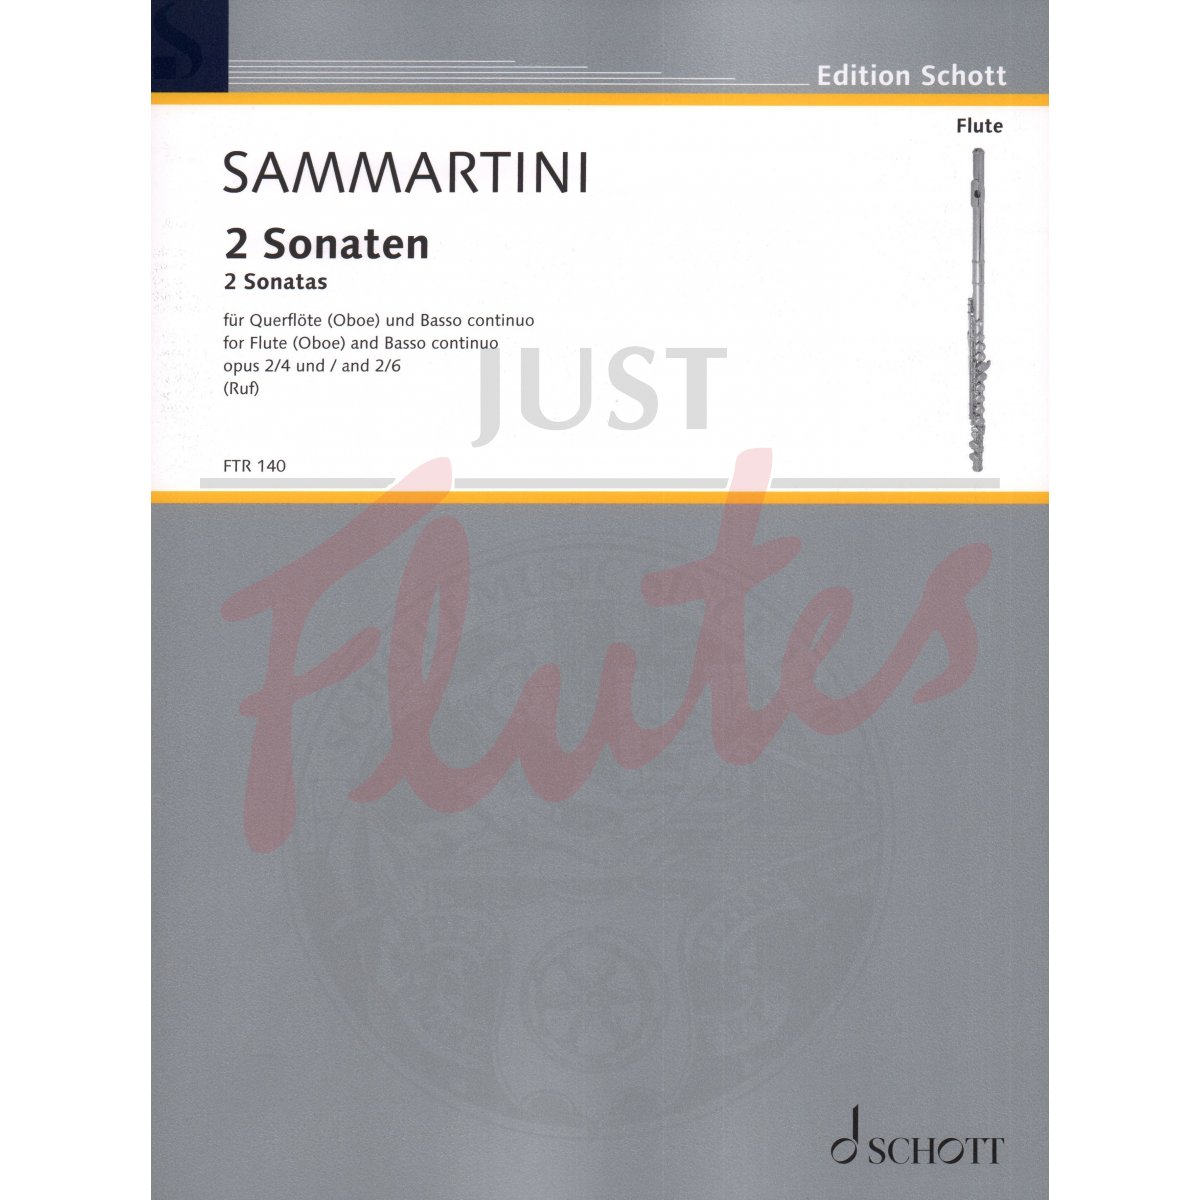 2 Sonatas for Flute and Basso Continuo